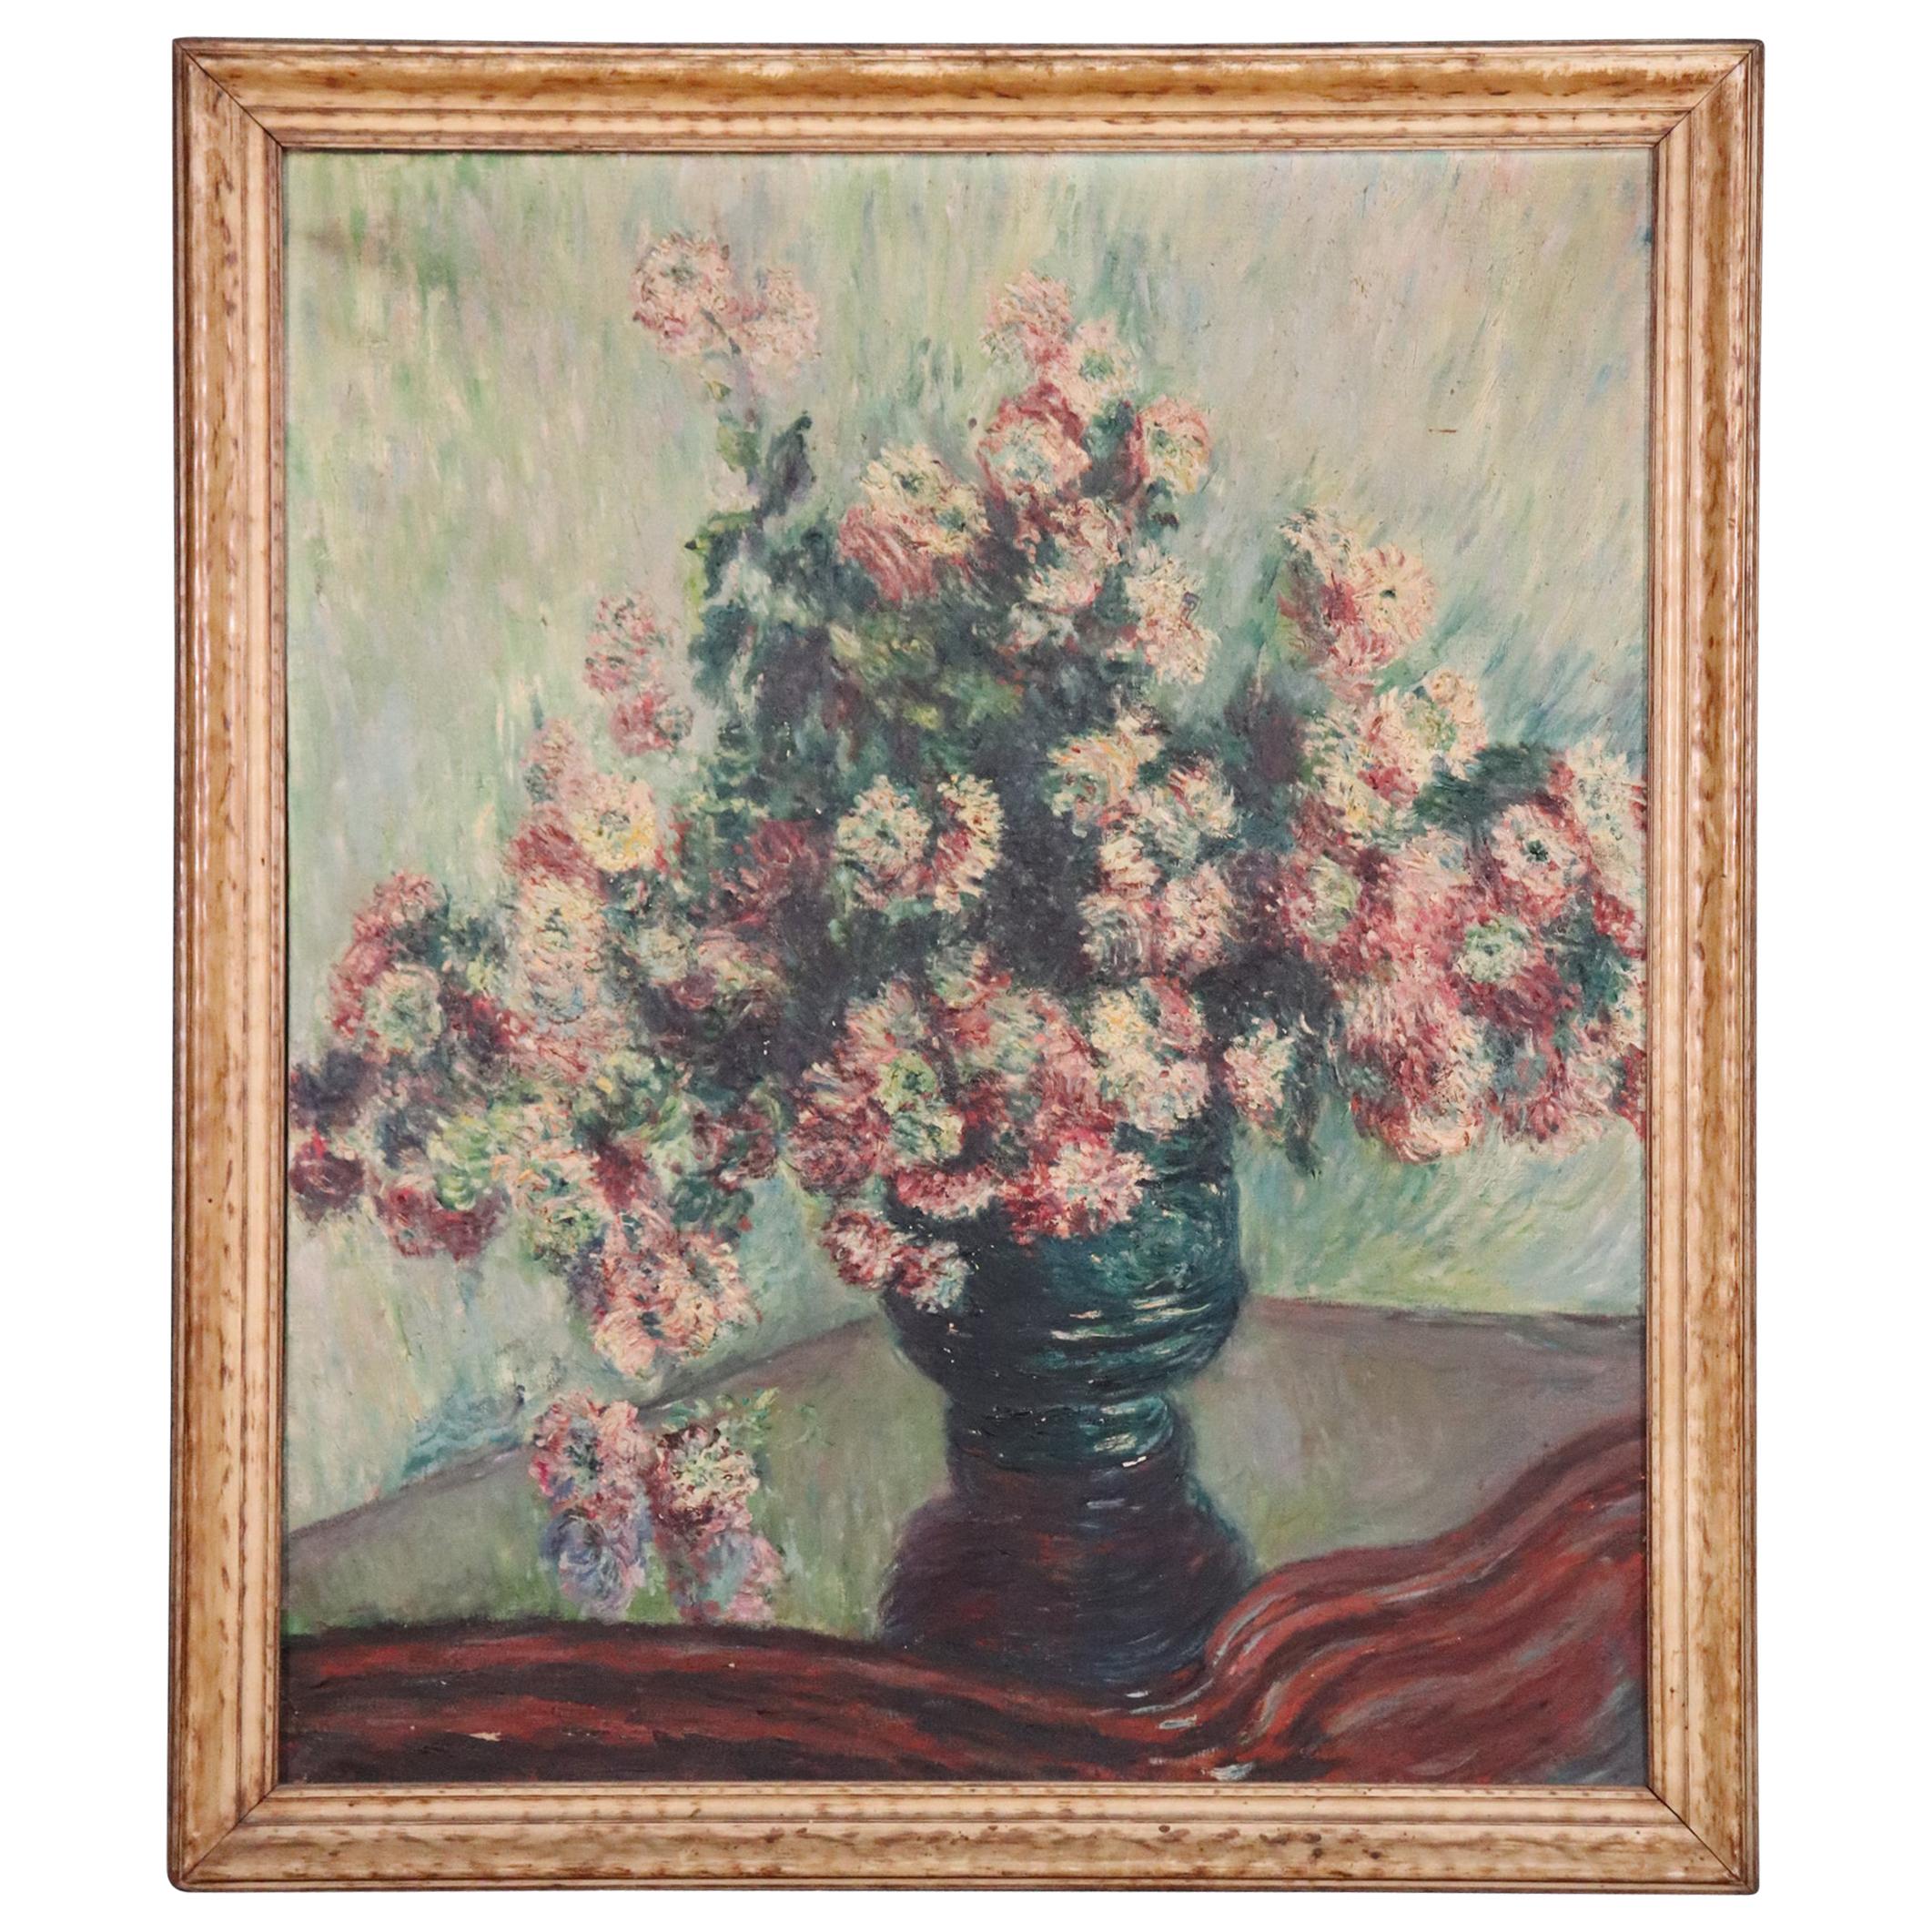 Impressionist Oil Painting of a Vase of Flowers, circa 1940